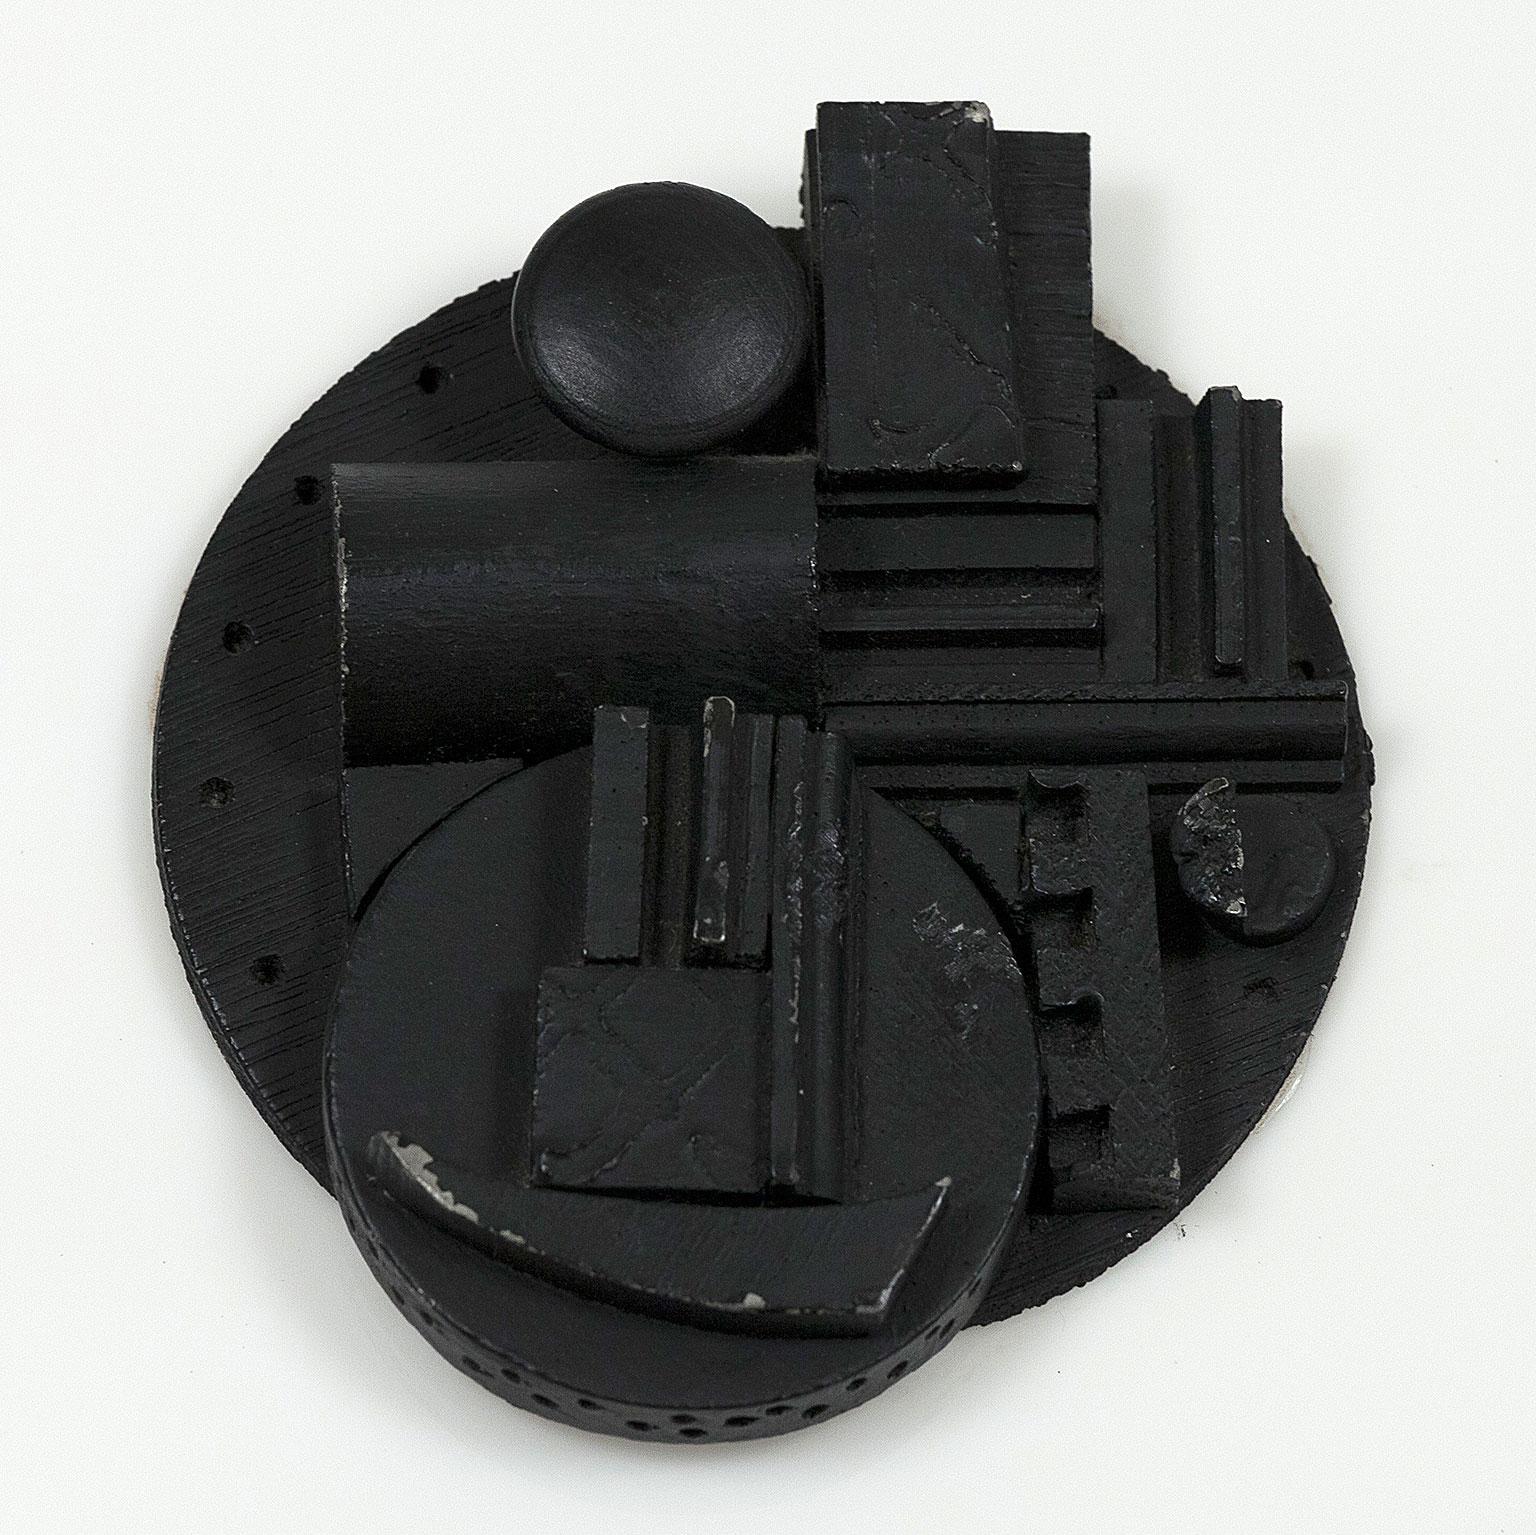 Louise Nevelson 